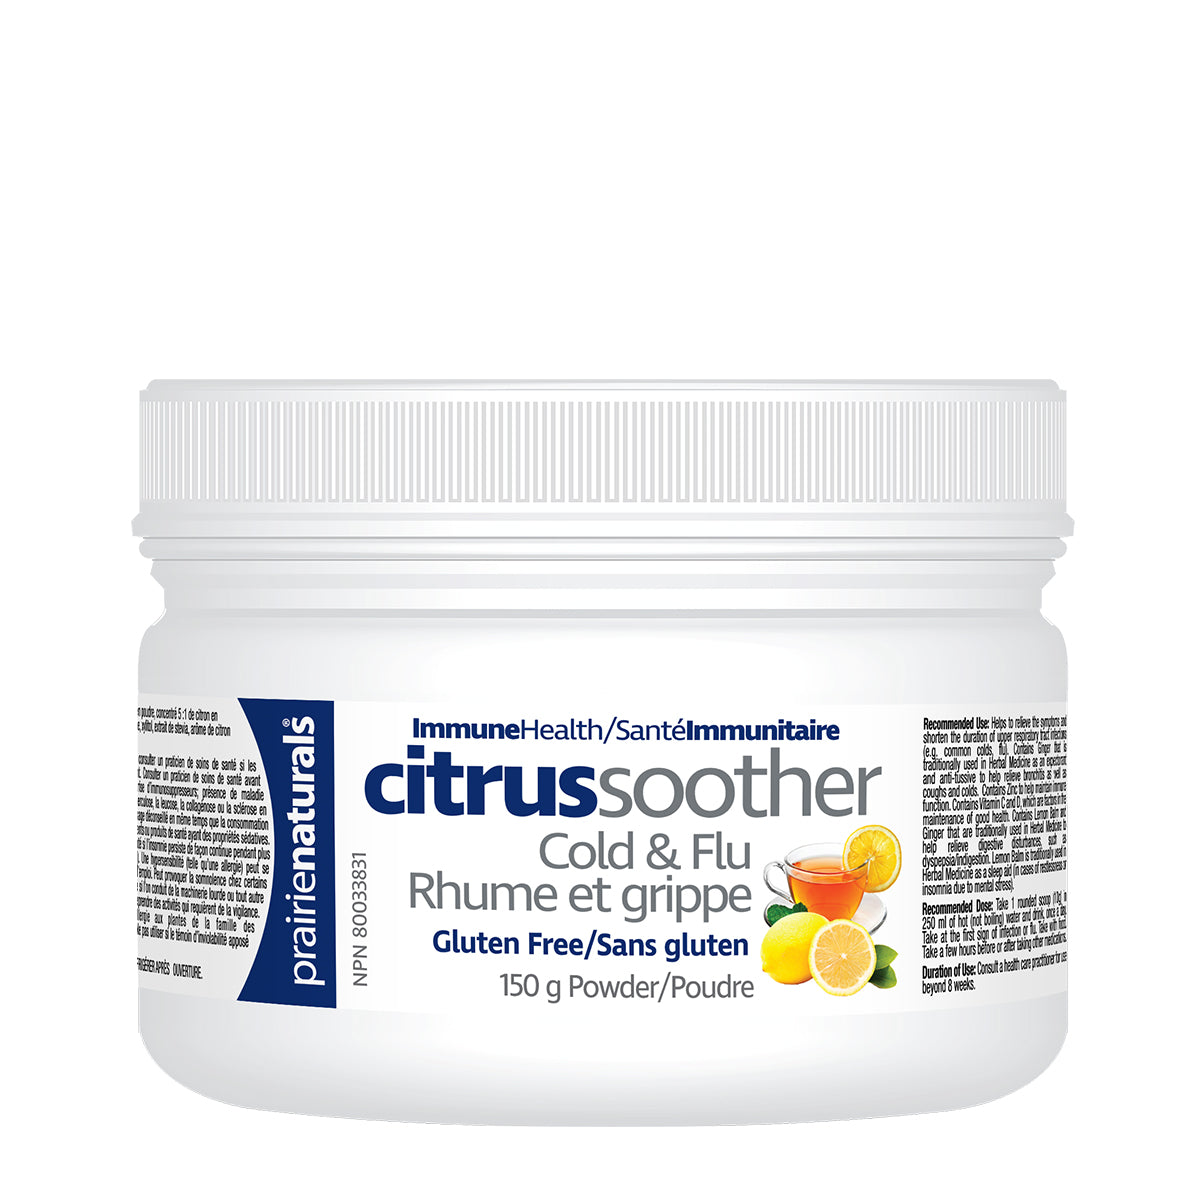 Citrus Soother rhume et grippe 150g